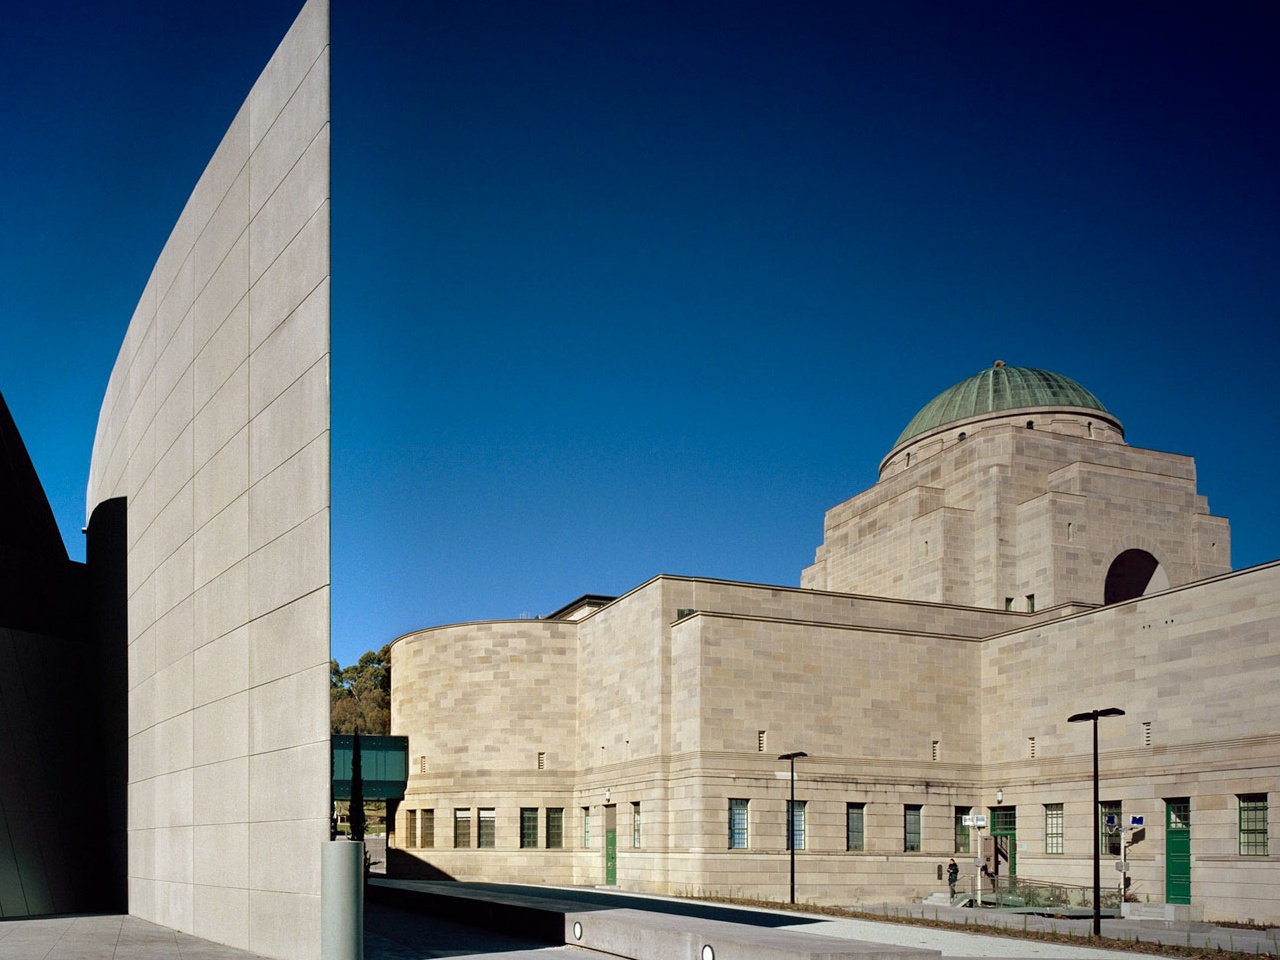 The Australian Institute of Architects (AIA) says the recently released plans to demolish award-winning Anzac Hall by the Australian War Memorial are &ldquo;deeply distressing&rdquo;. Image: Dentom Corker Marshall
